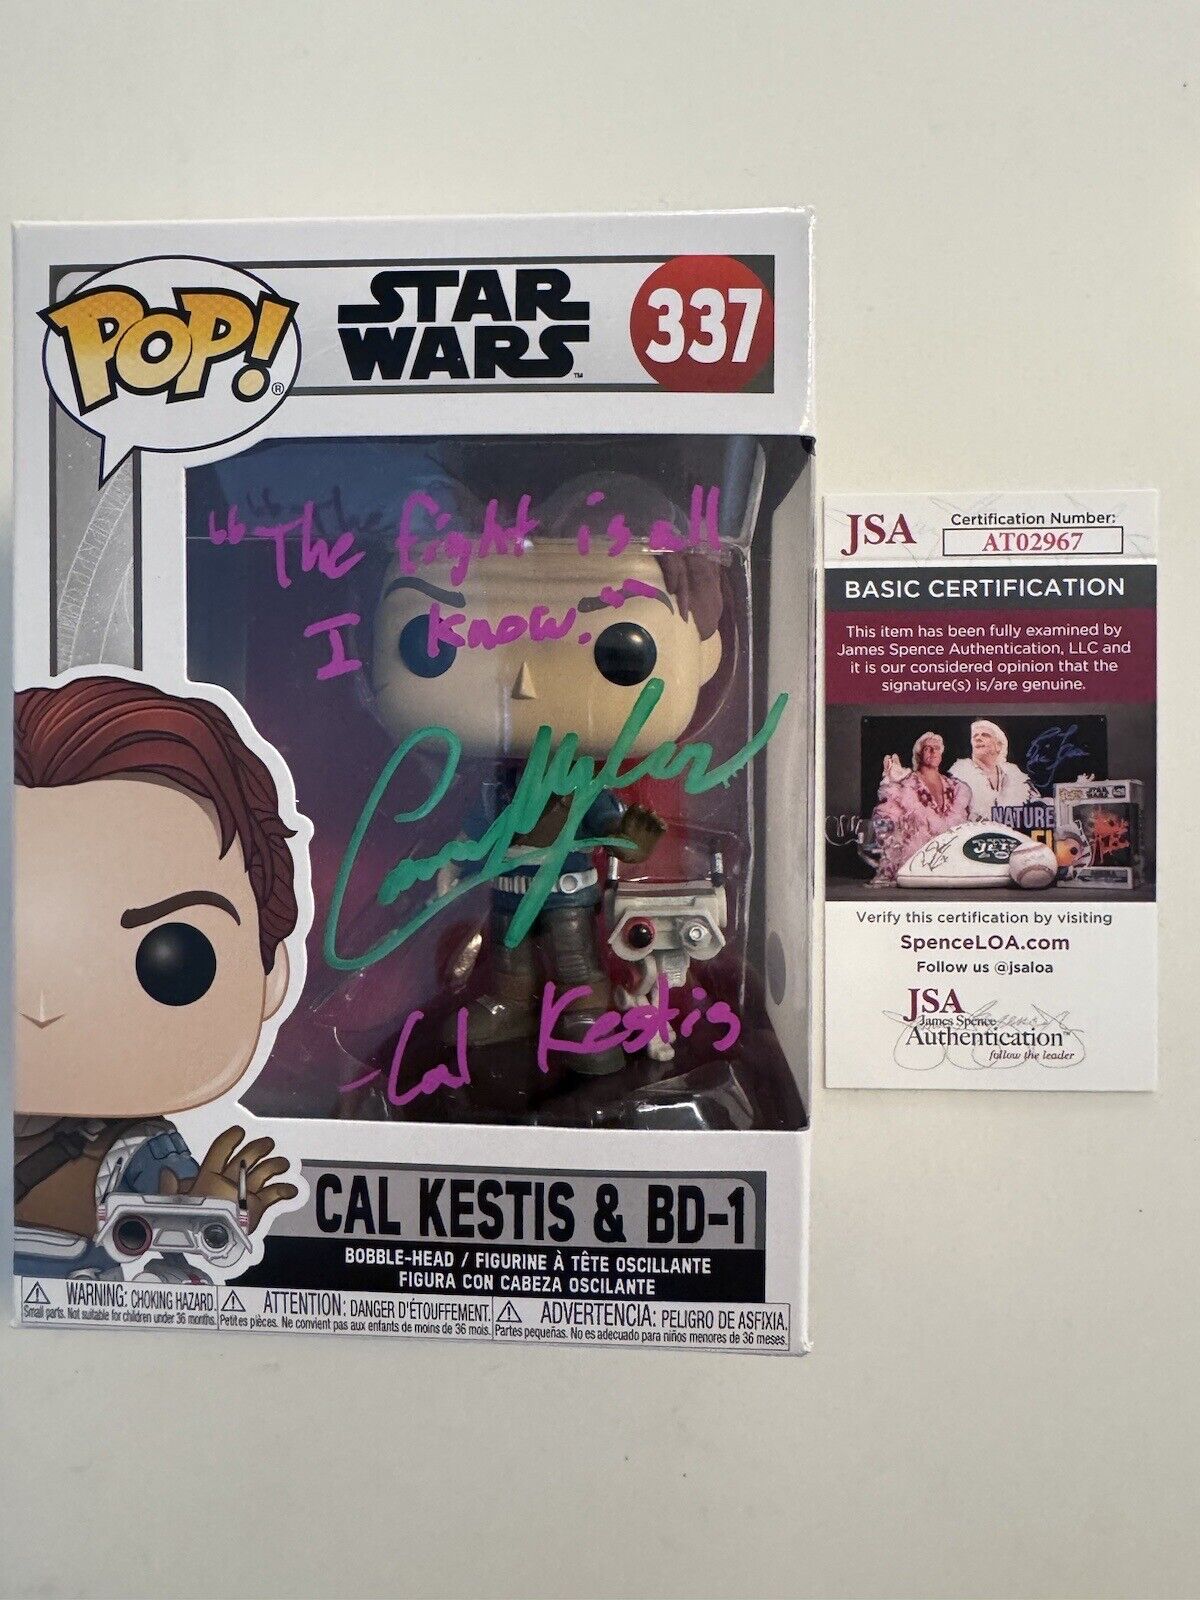 STAR WARS: Cal Kestis & BD-1 - Signed by Cameron Monaghan- MAKE ME AN OFFER